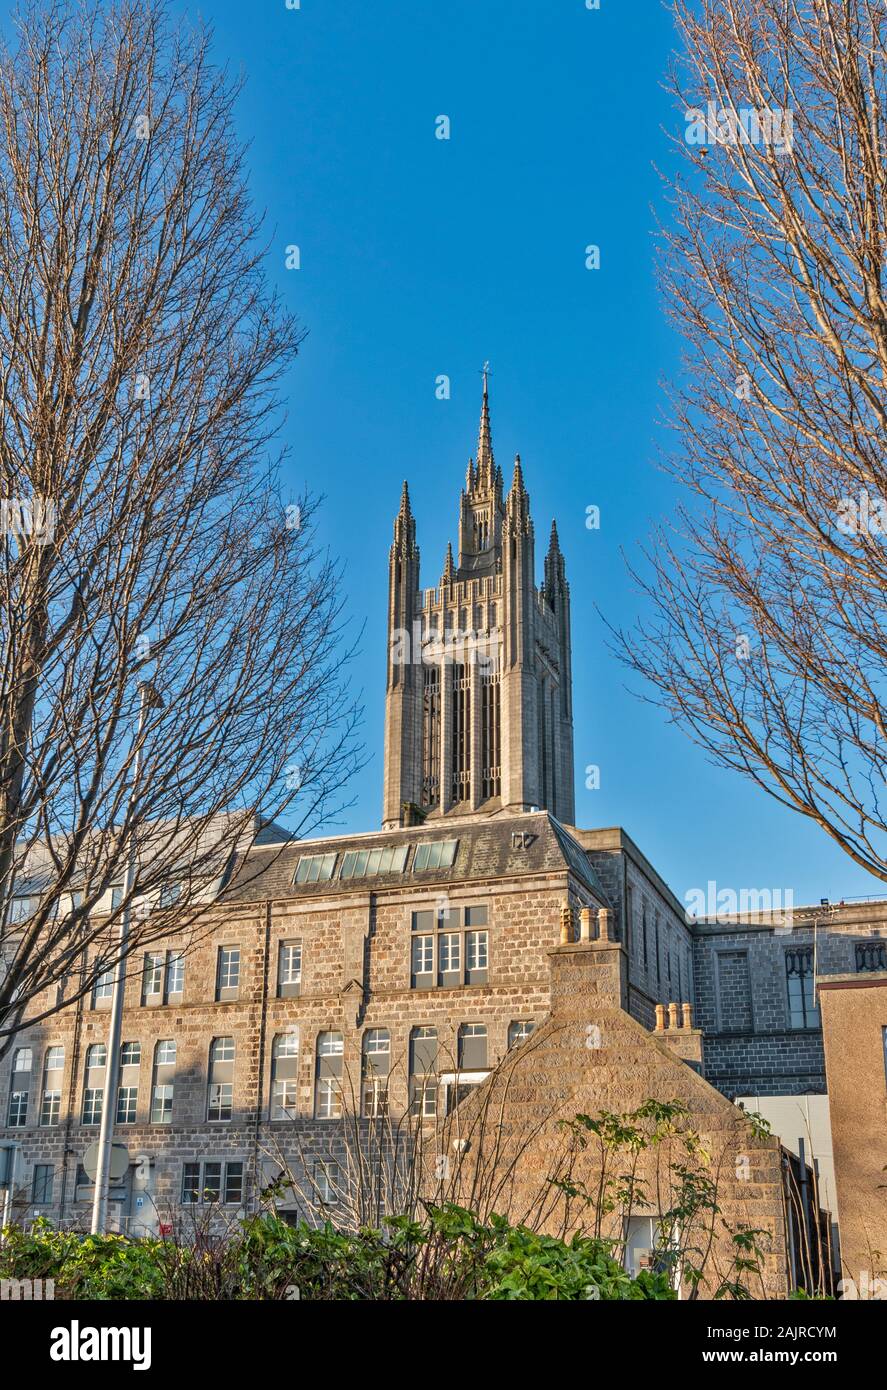 ABERDEEN CITY SCOTLAND THE ICONIC MITCHELL TOWER AT MARISCHAL COLLEGE AND SURROUNDING HOUSES Stock Photo